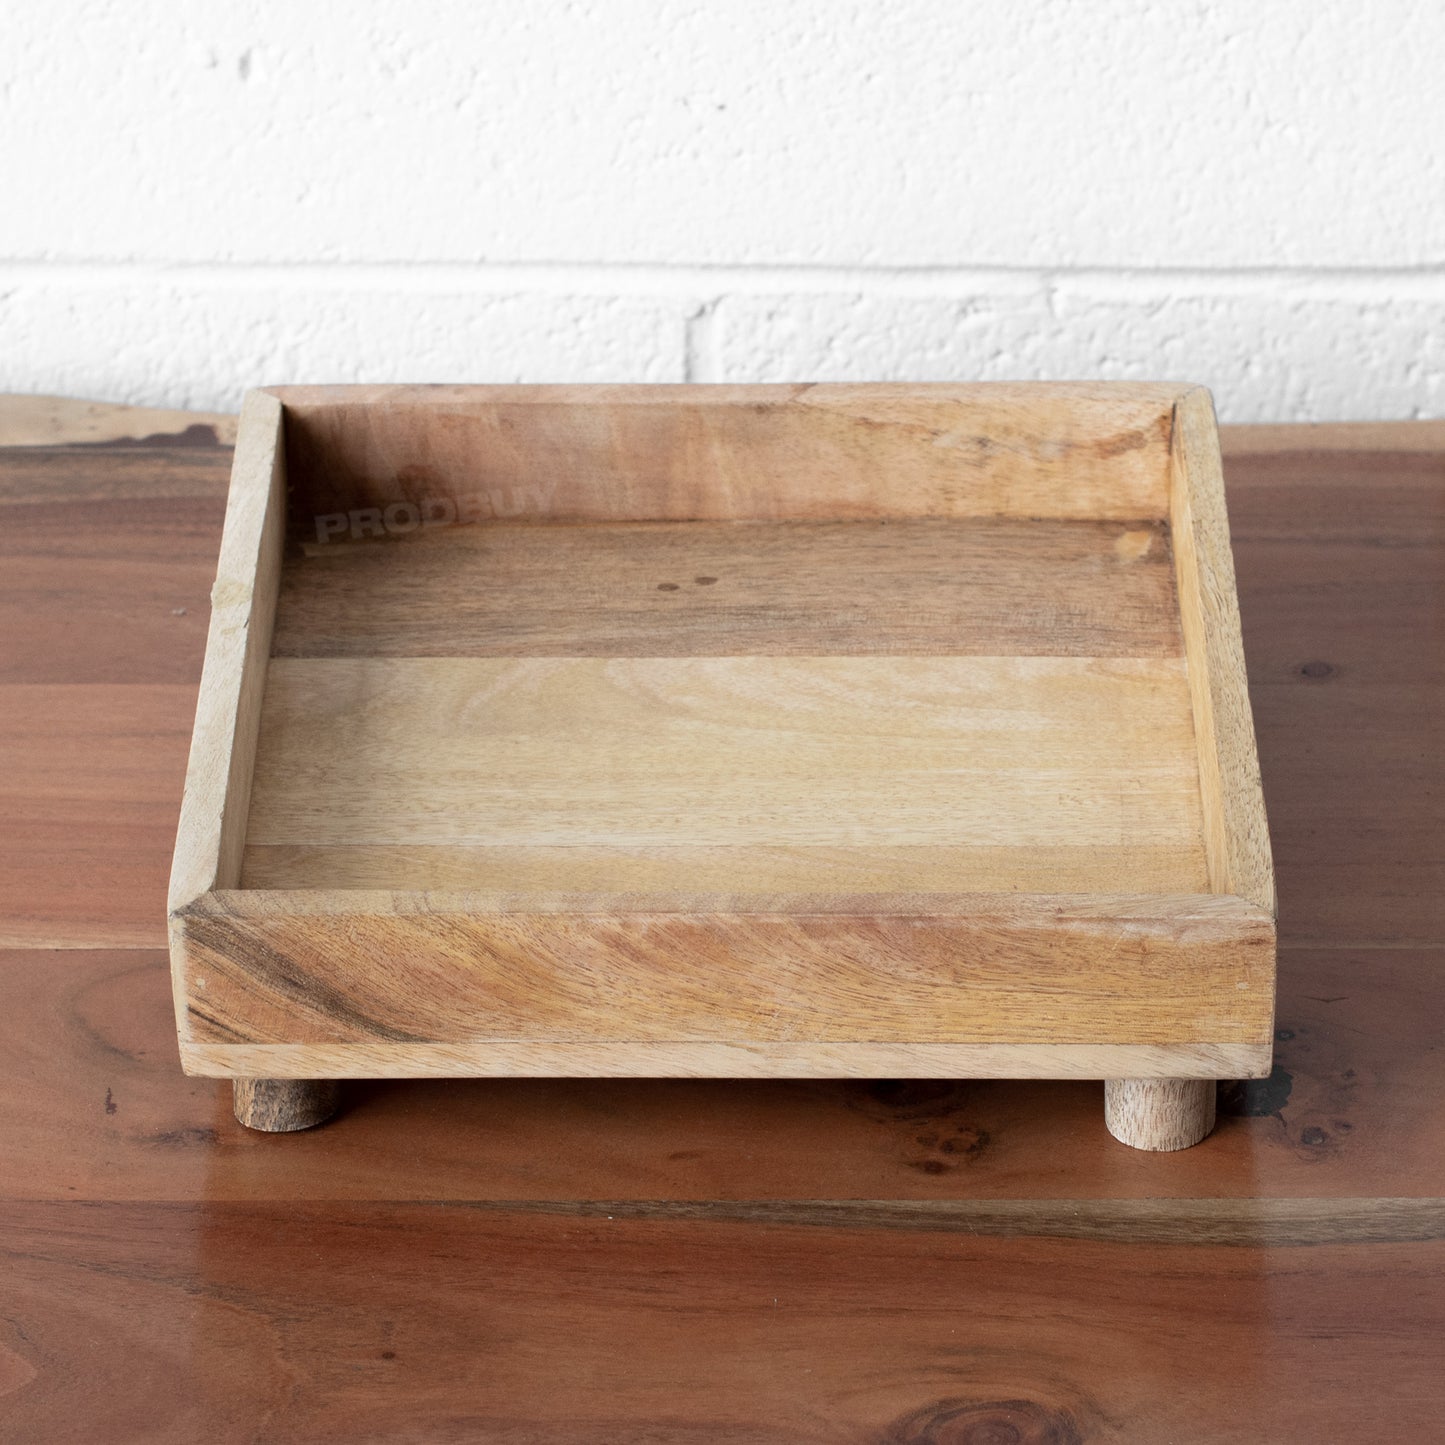 Square 24cm Wooden Plant Pot Tray with Legs